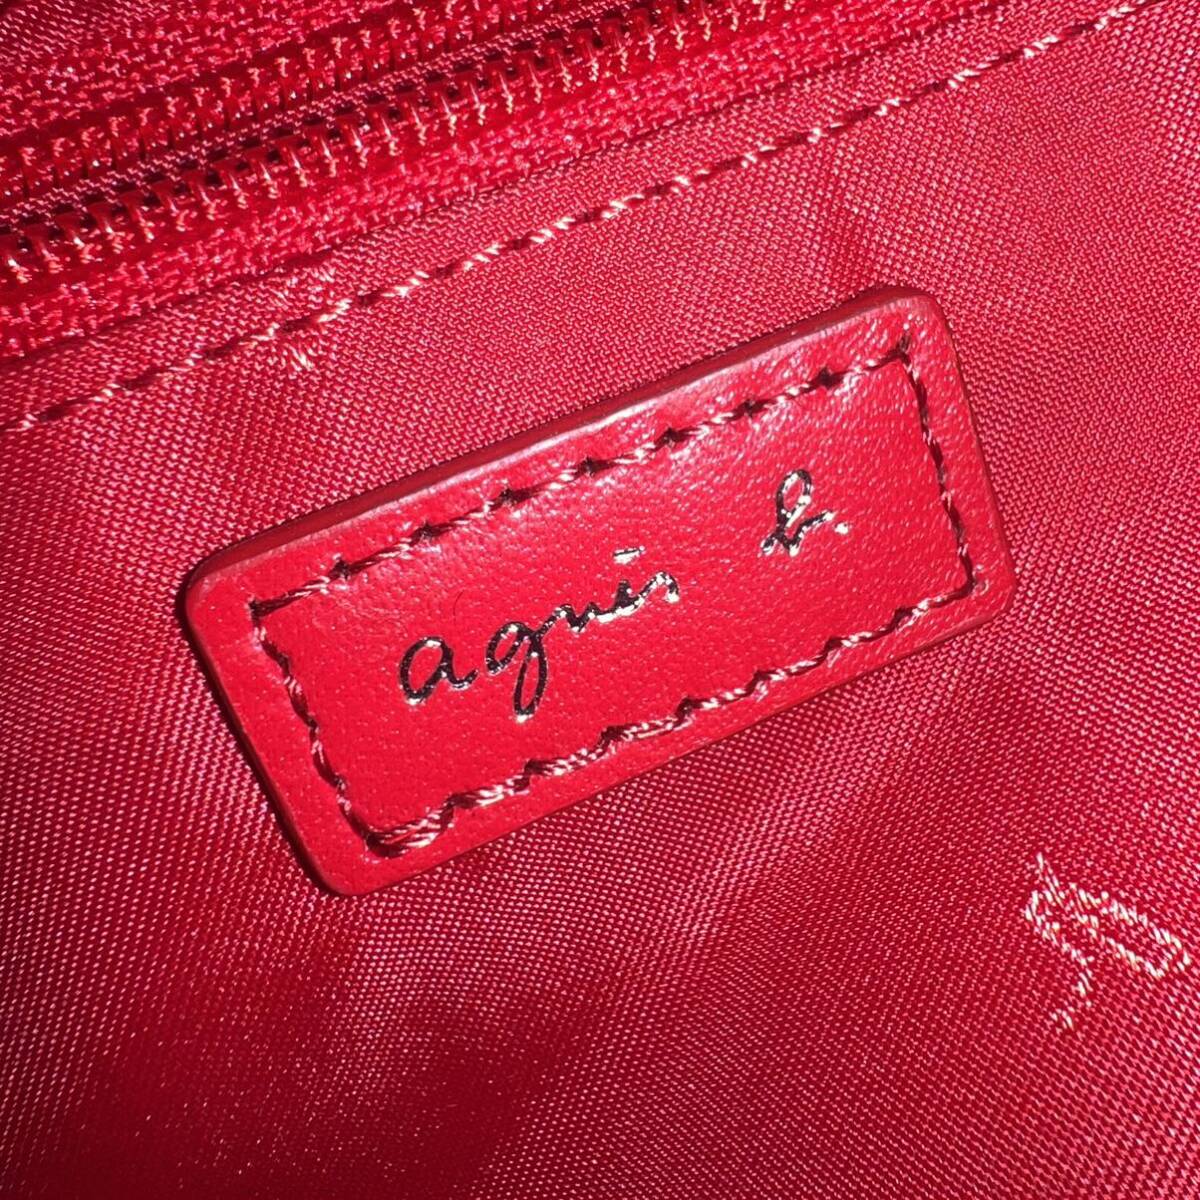 [ free shipping ]agnes b. Agnes B all leather shoulder bag red red cow leather diagonal .. camera bag Mini bag bag 